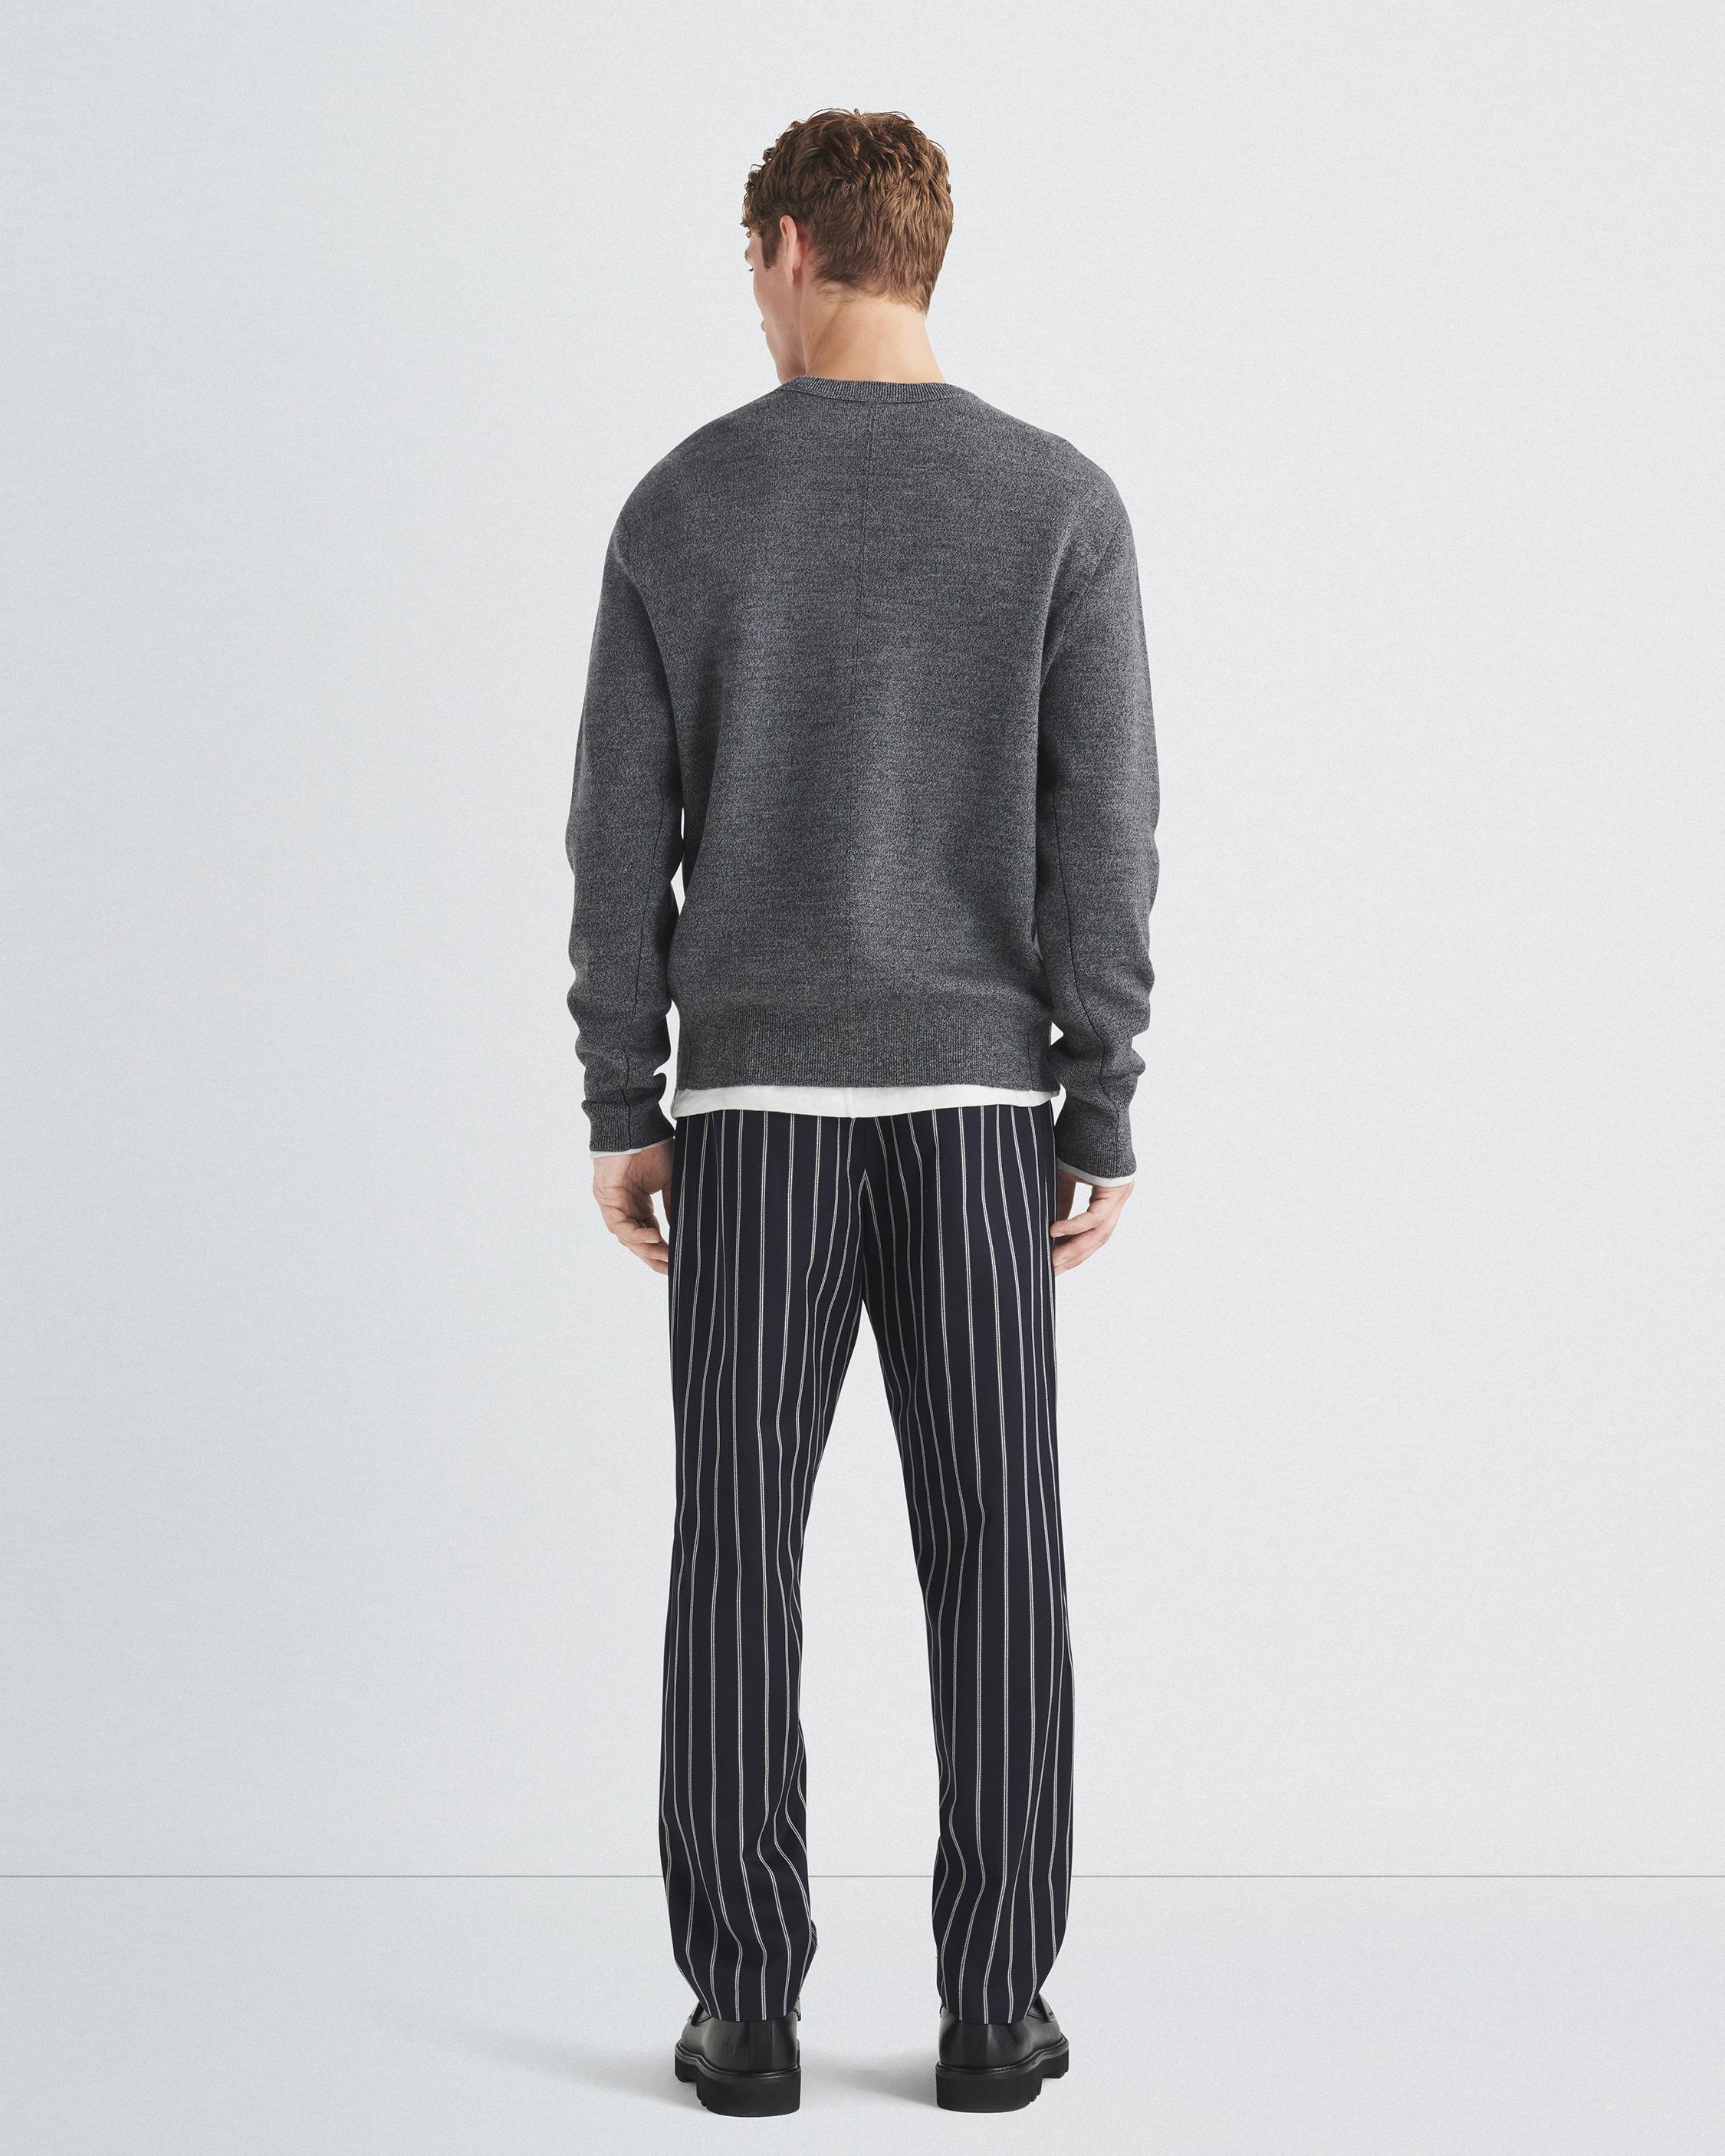 York Wool Crew
Relaxed Fit - 5